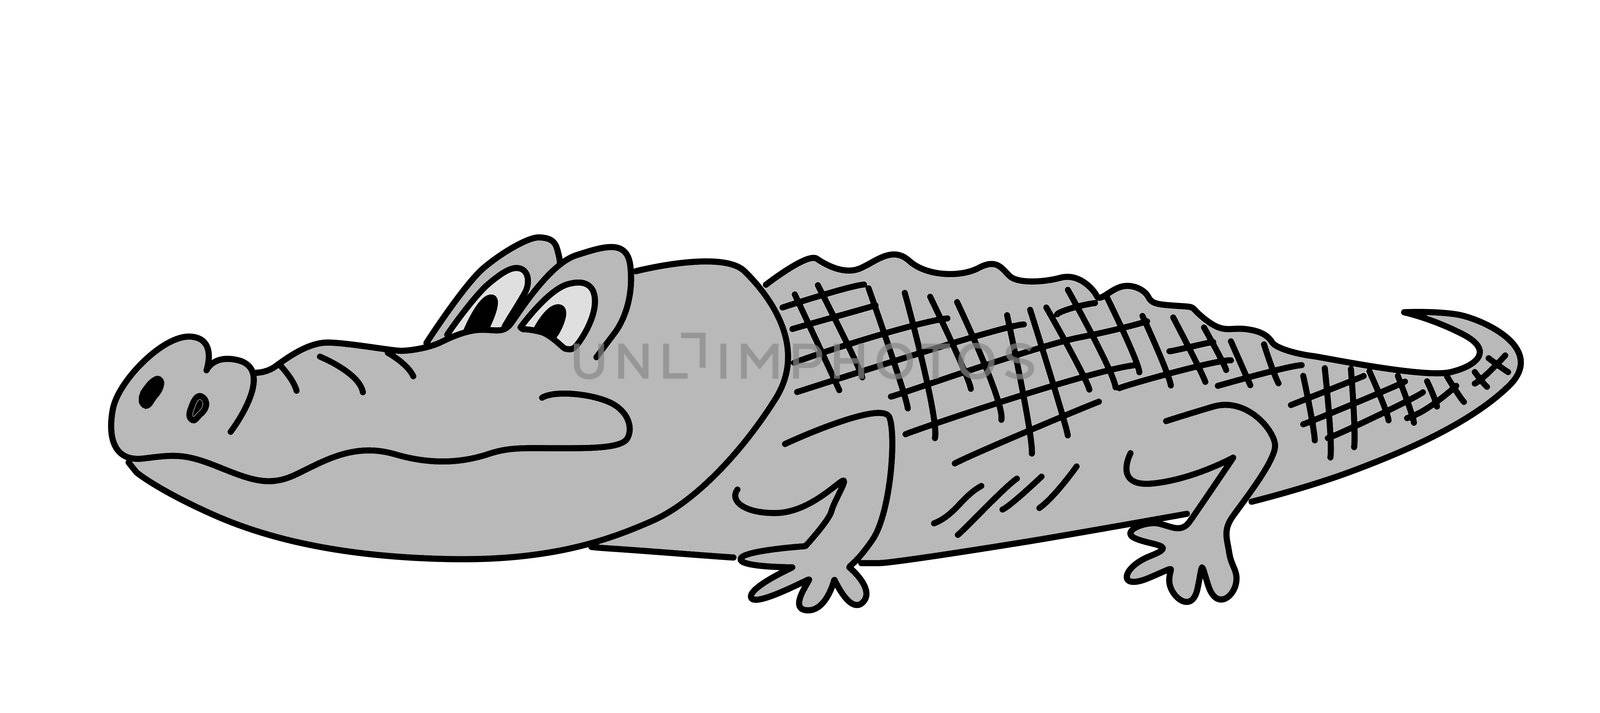 gray crocodile on white background by basel101658